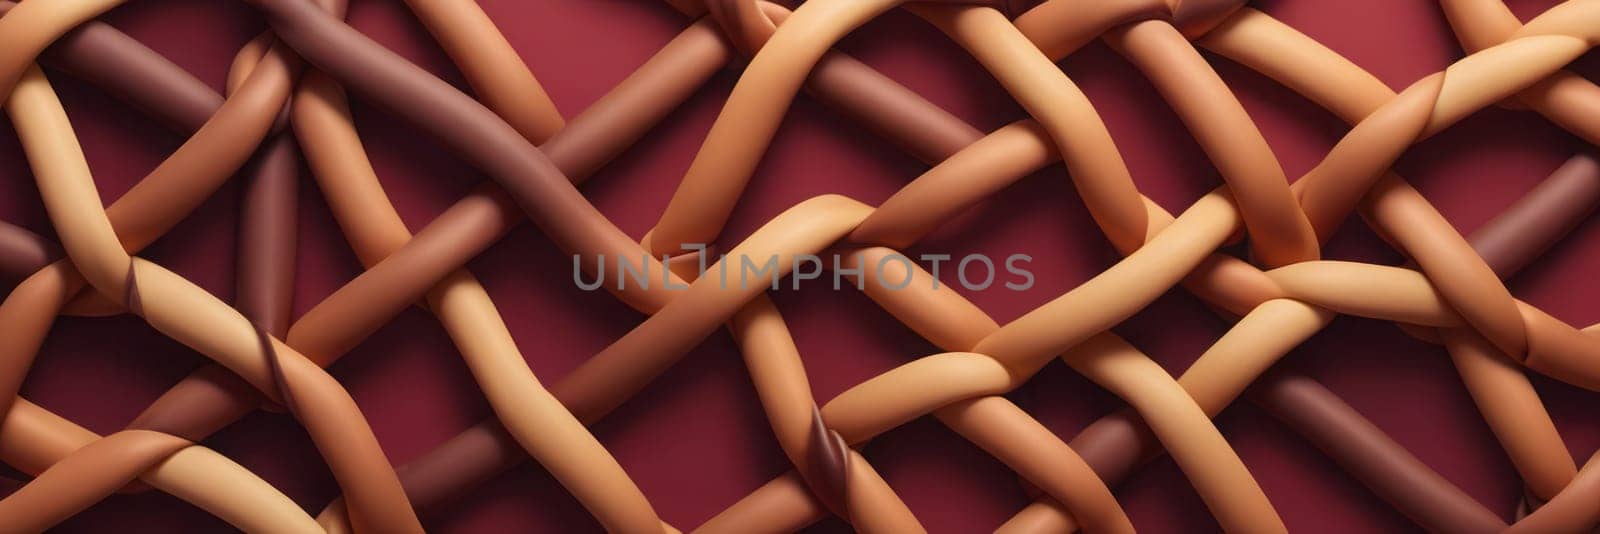 Knotted Shapes in Maroon and Chocolate by nkotlyar